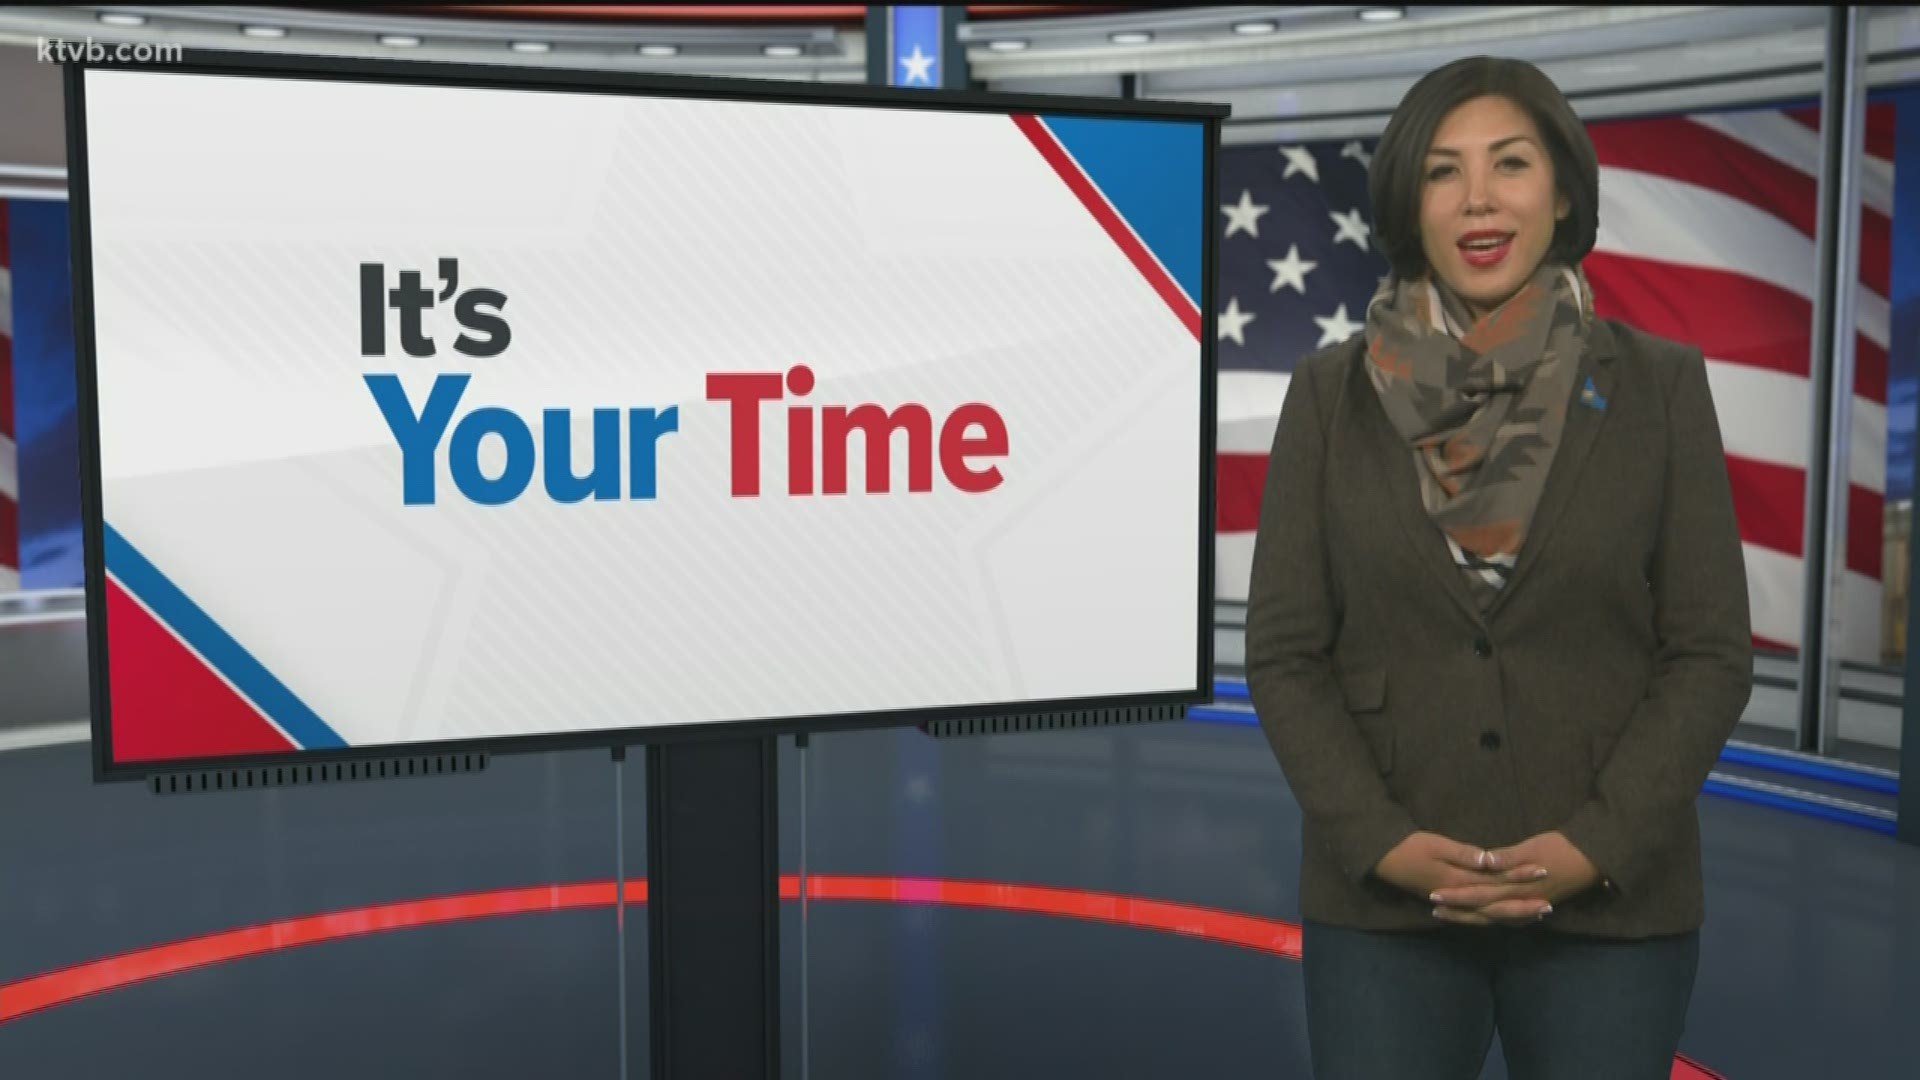 "It's Your Time: KTVB asked November 2018 election candidates to share a one-minute pitch to voters. We've been airing these segments in our Channel 7 noon newscasts throughout October."